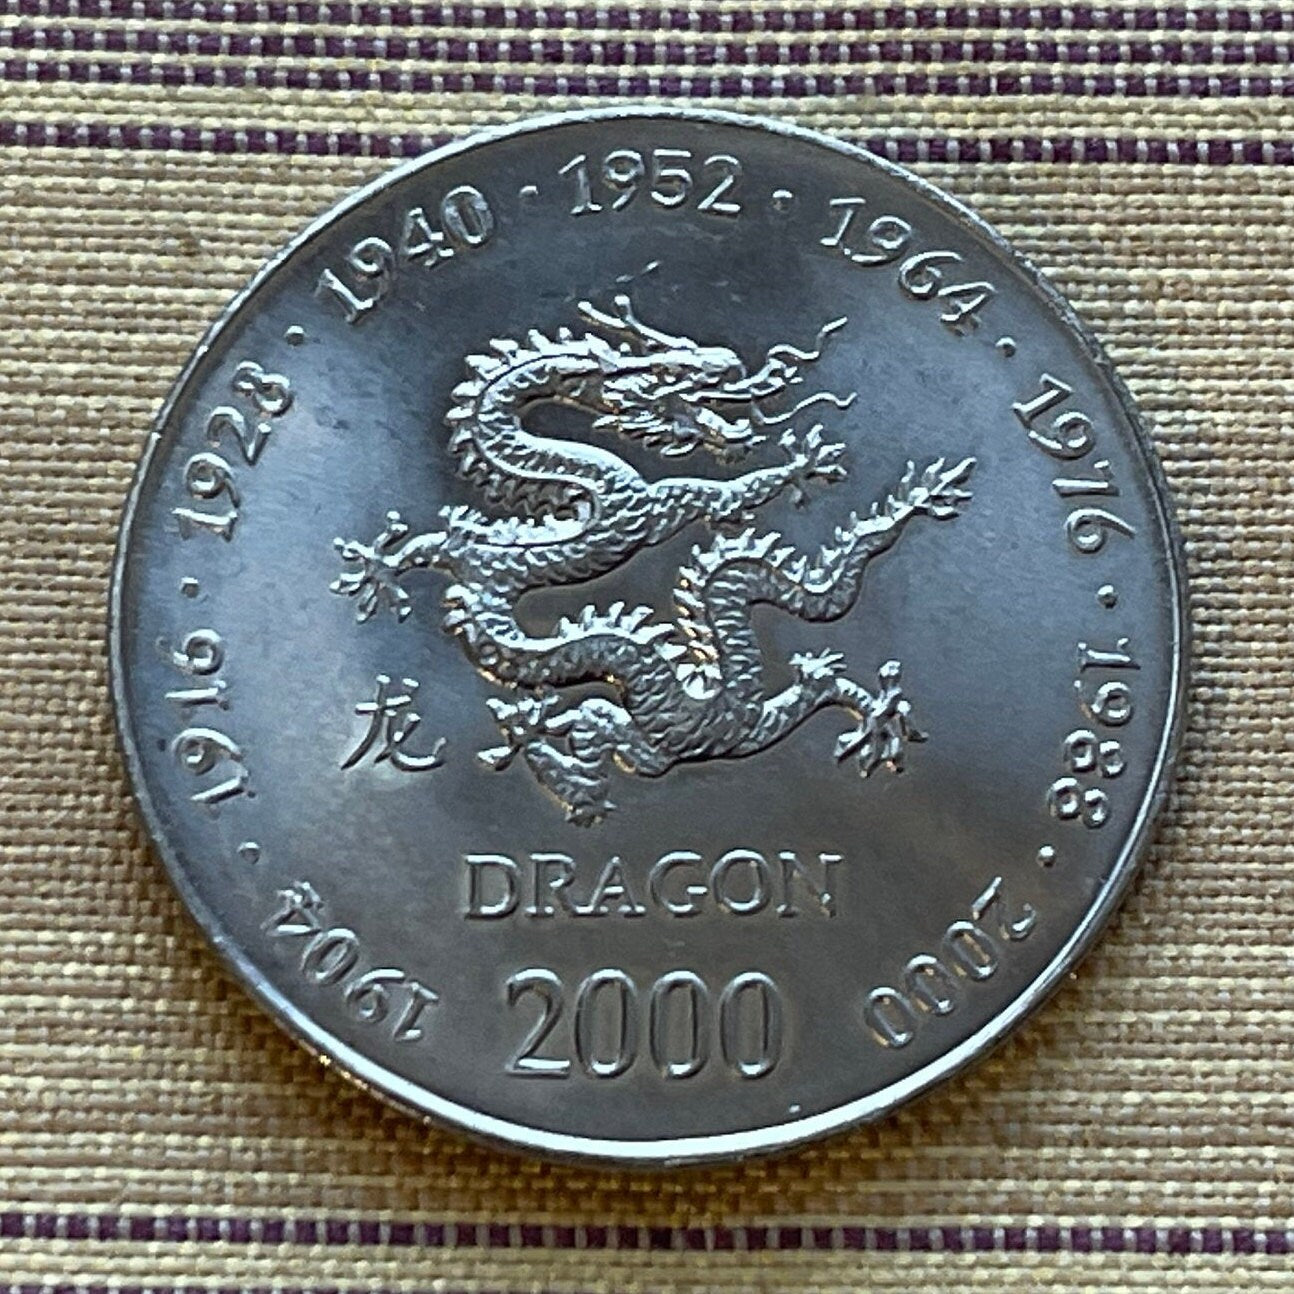 Year of the Dragon Chinese Zodiac 10 Shillings Somalia Authentic Coin Money for Jewelry and Craft Making (2000)